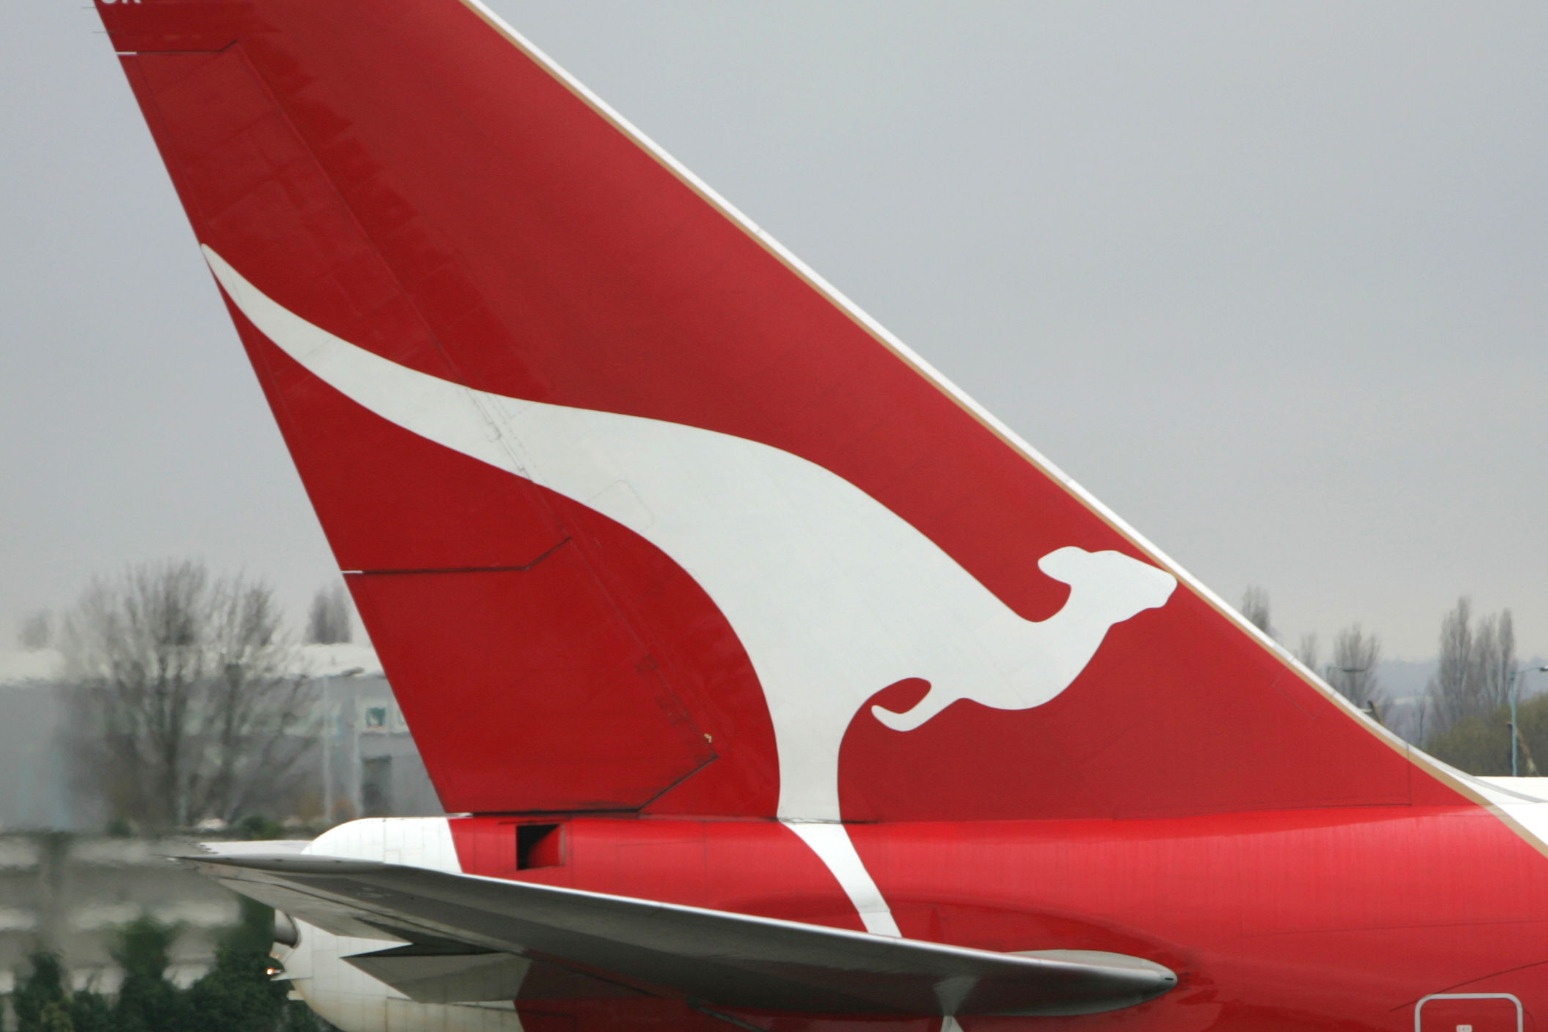 QANTAS JET LANDS IN SYDNEY AFTER NON-STOP FLIGHT FROM LONDON 